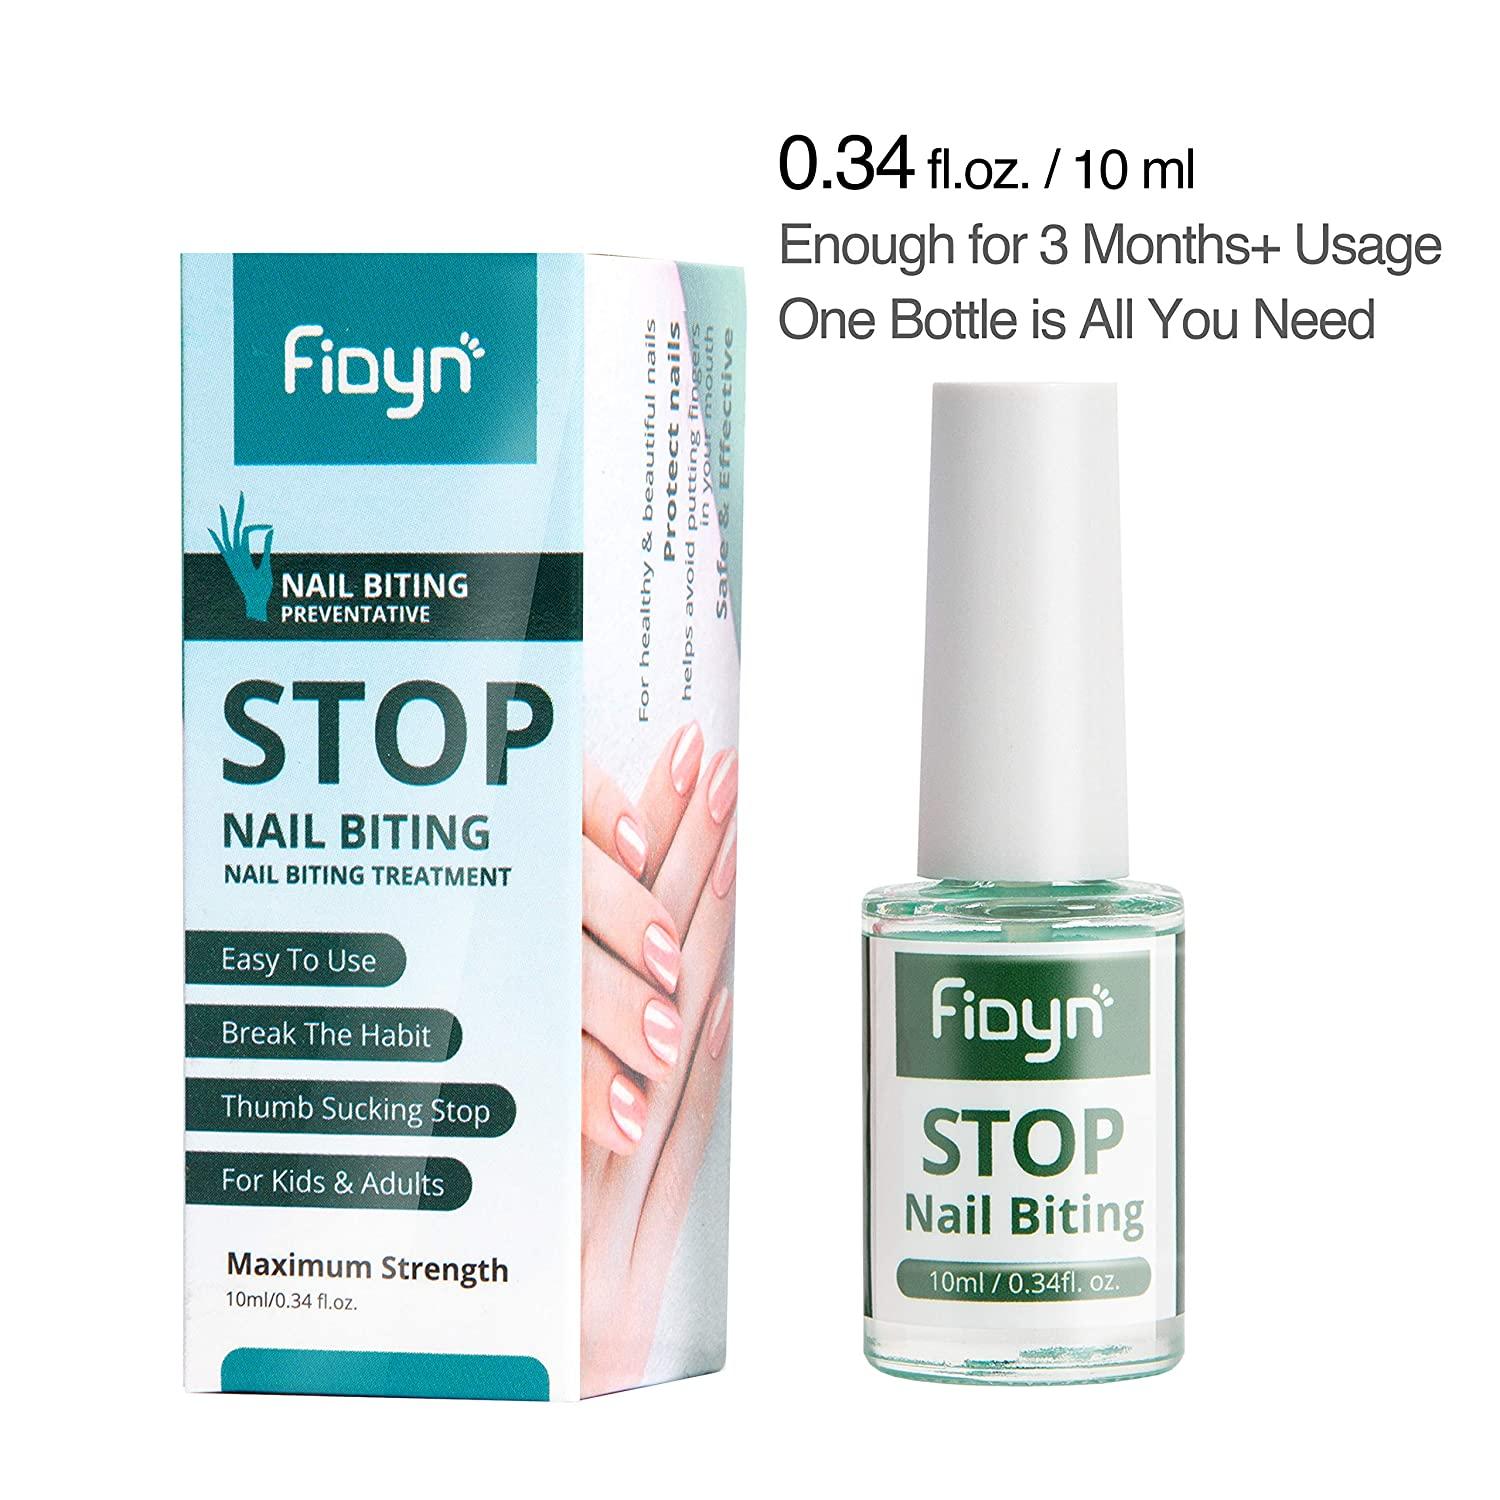 Fidyn No Bite Nail Polish Nail Biting Treatment With Bitter Polish To Help Adults To Quit Nail